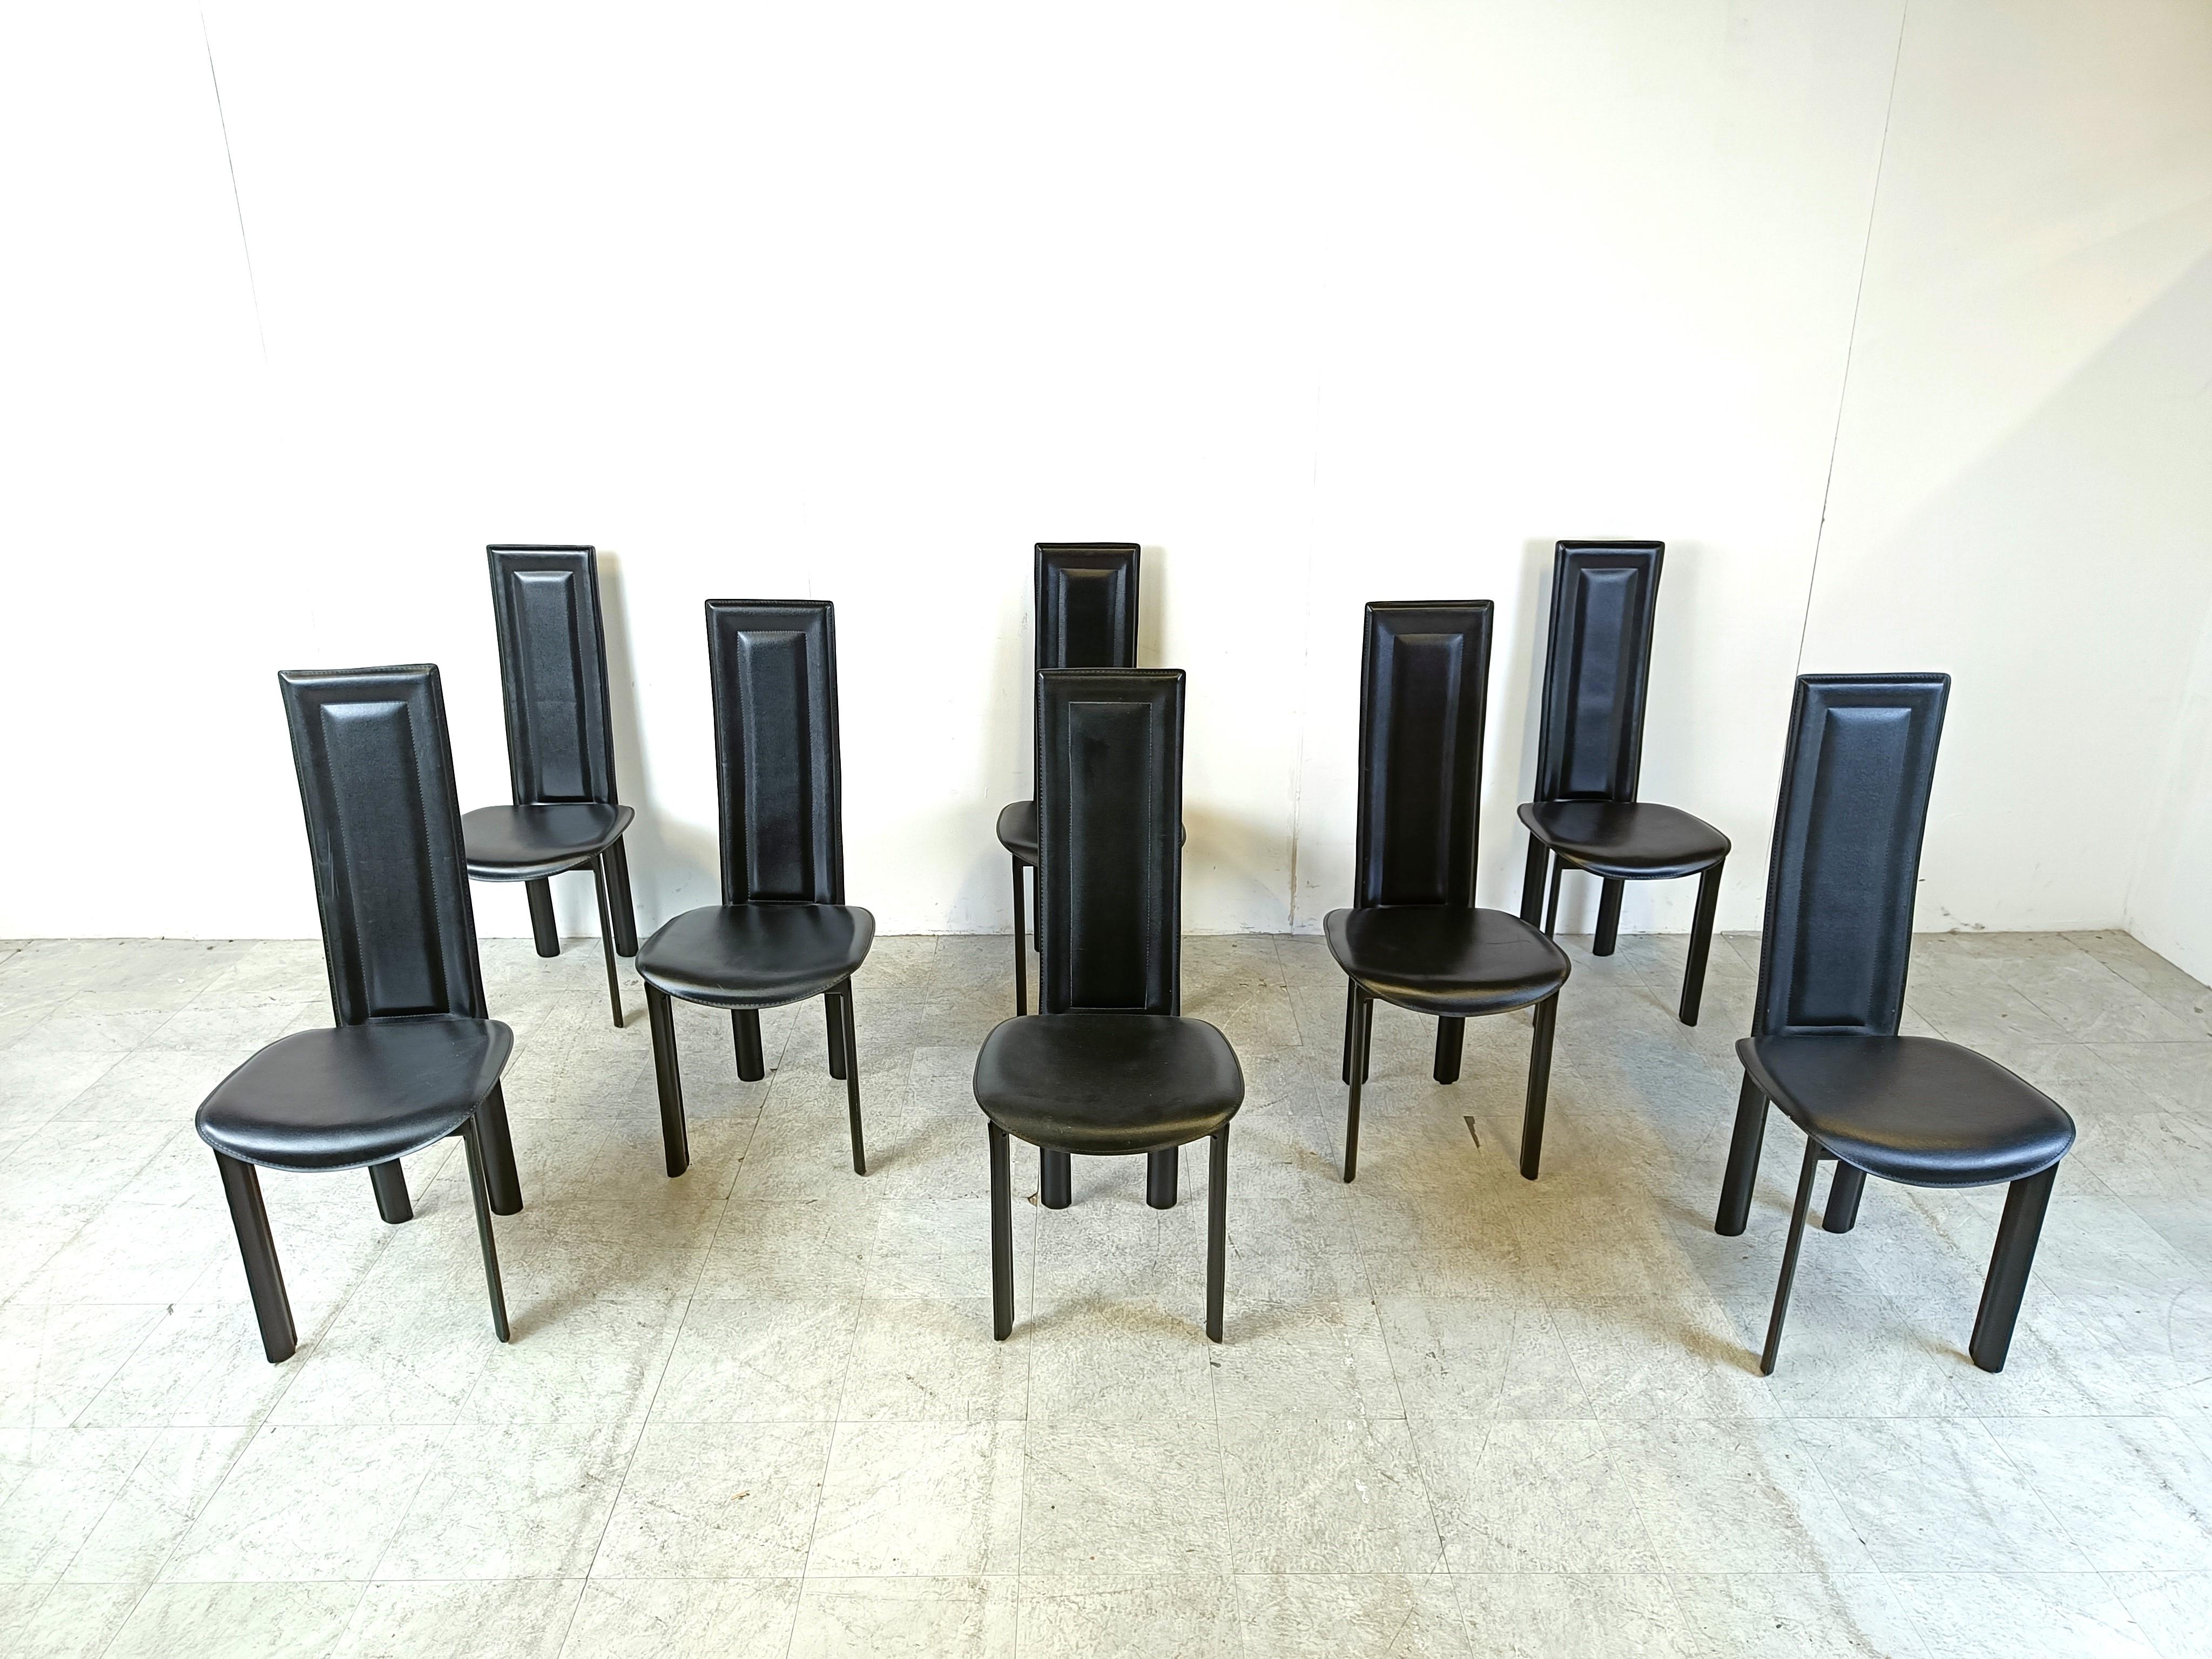 Set of 8 black italian leather high back dining chairs.

beautiful sleek and timeless design.

The chairs are in good condition with minimal wear.

1980s - Italy

Dimensions
height: 110cm/43.30